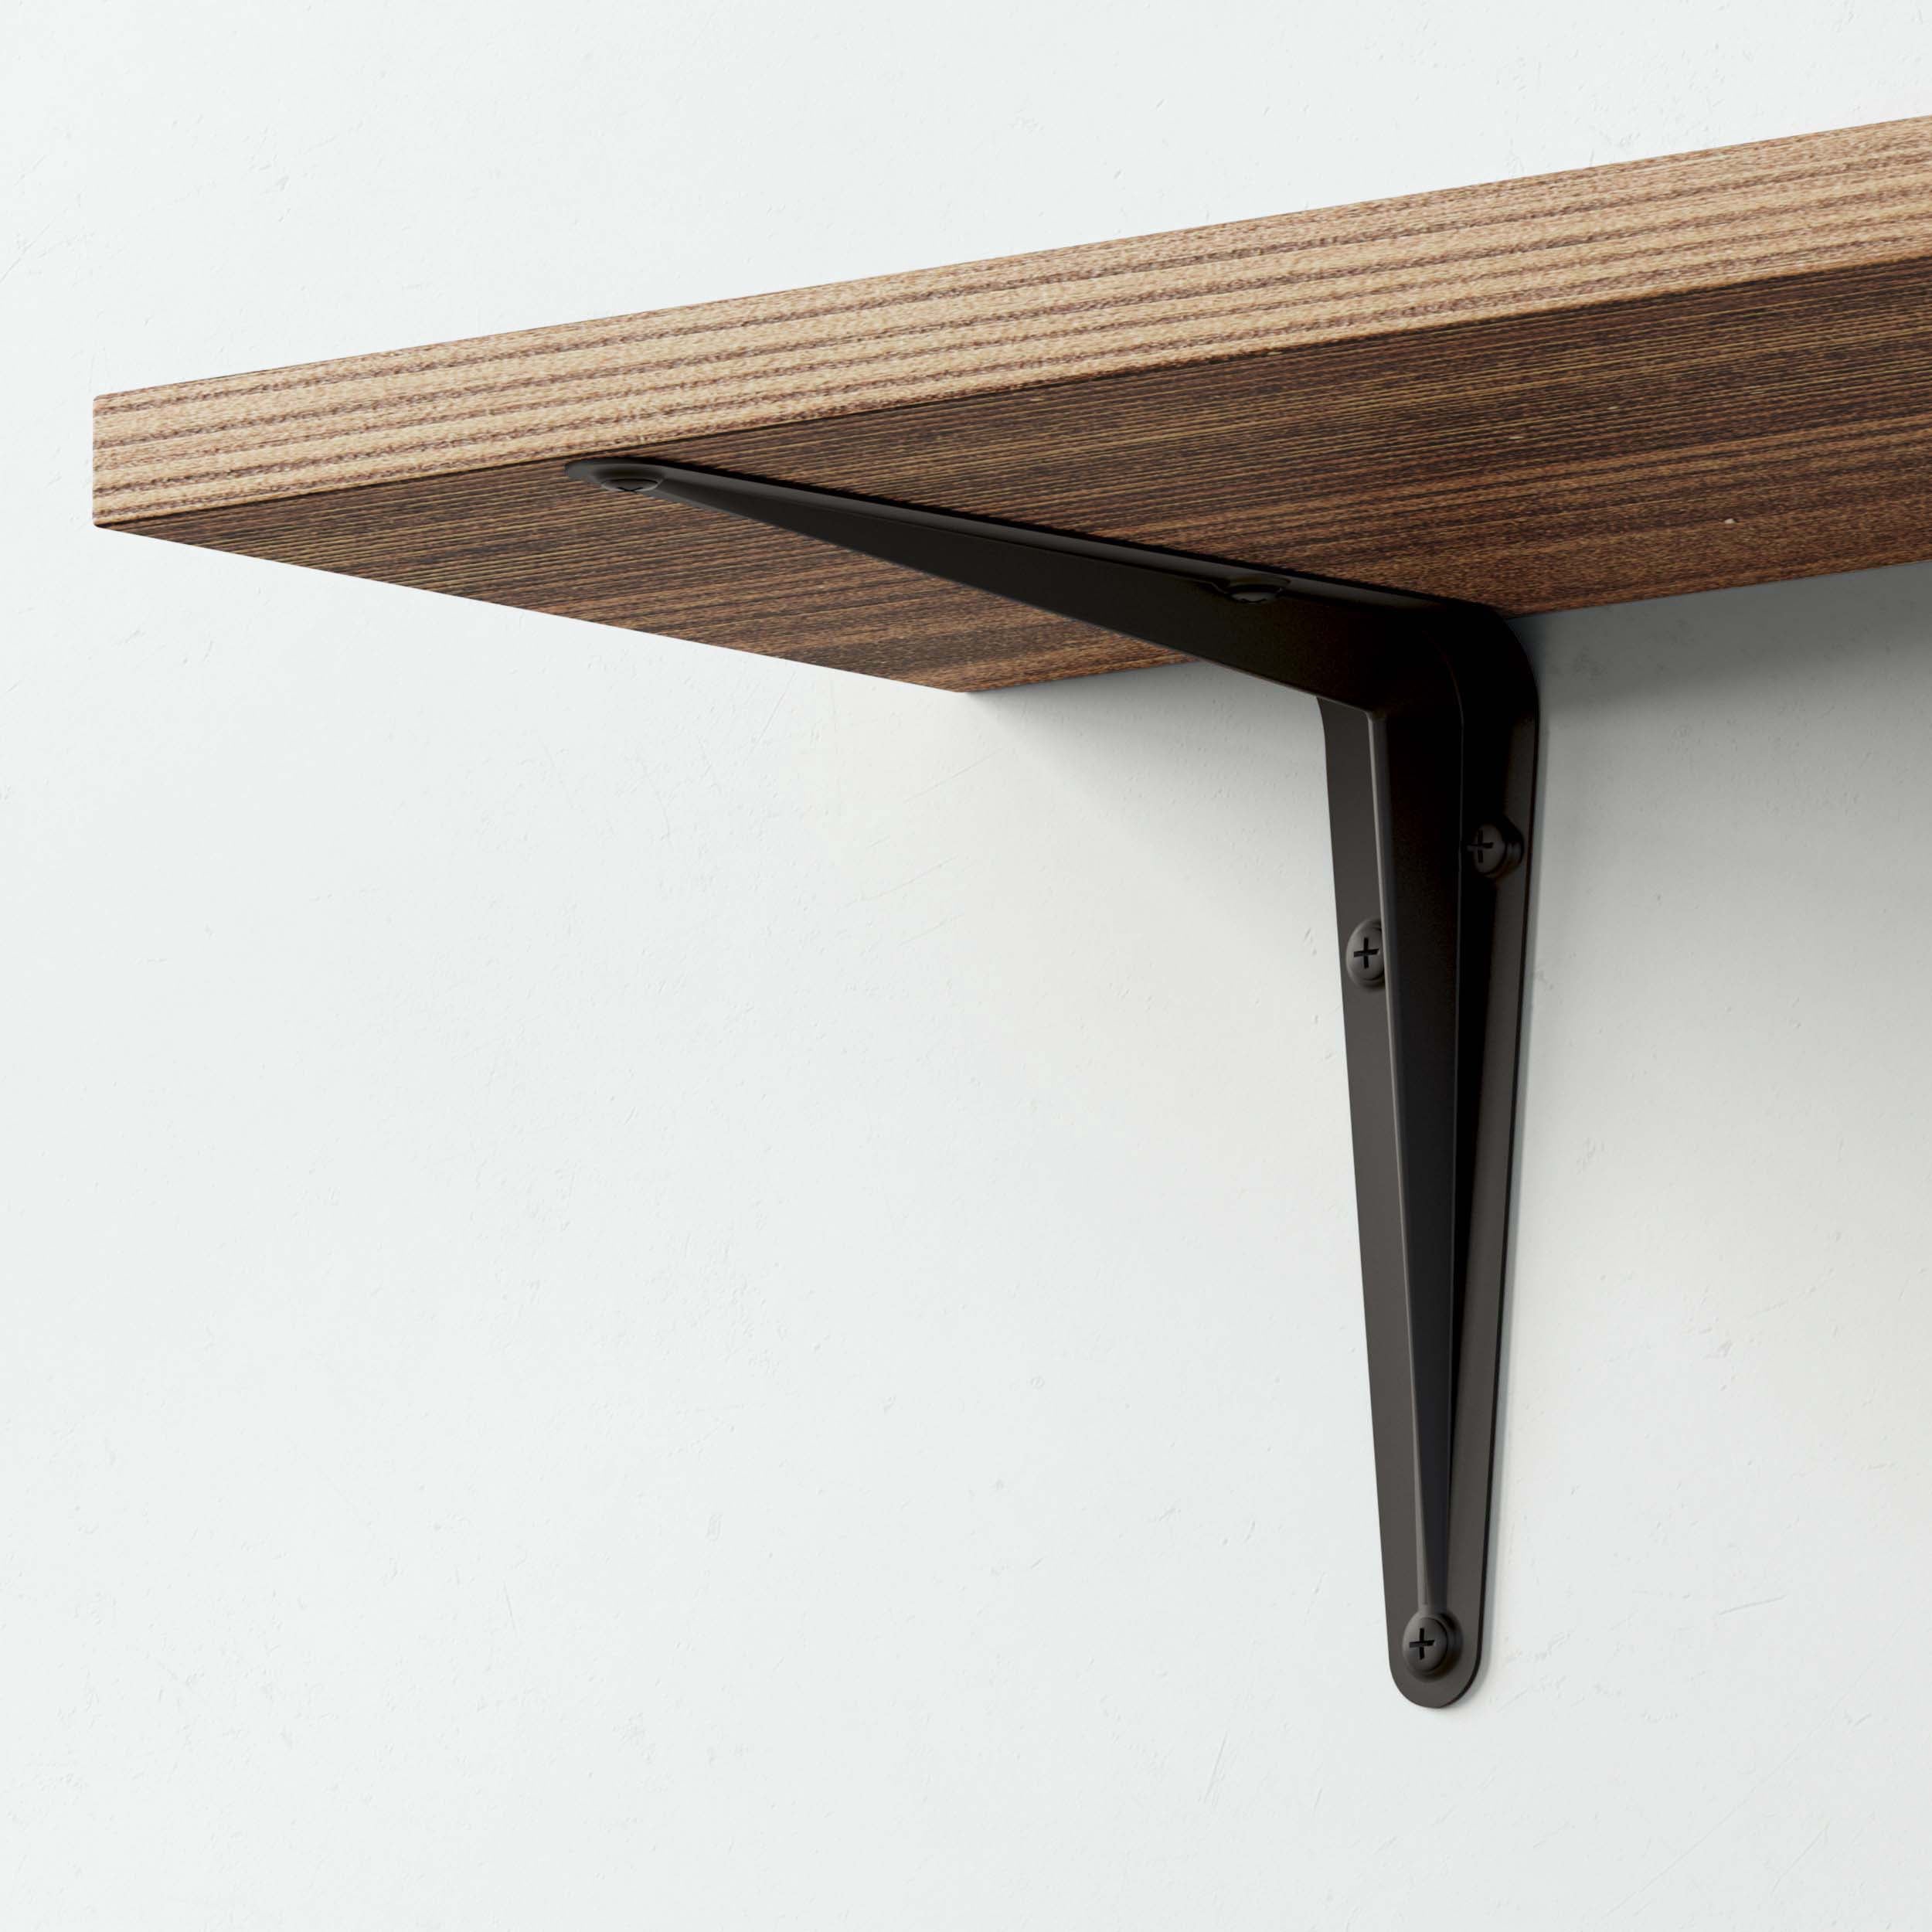 Black metal bracket supporting a wooden shelf, ideal for sturdy wall-mounted shelving.